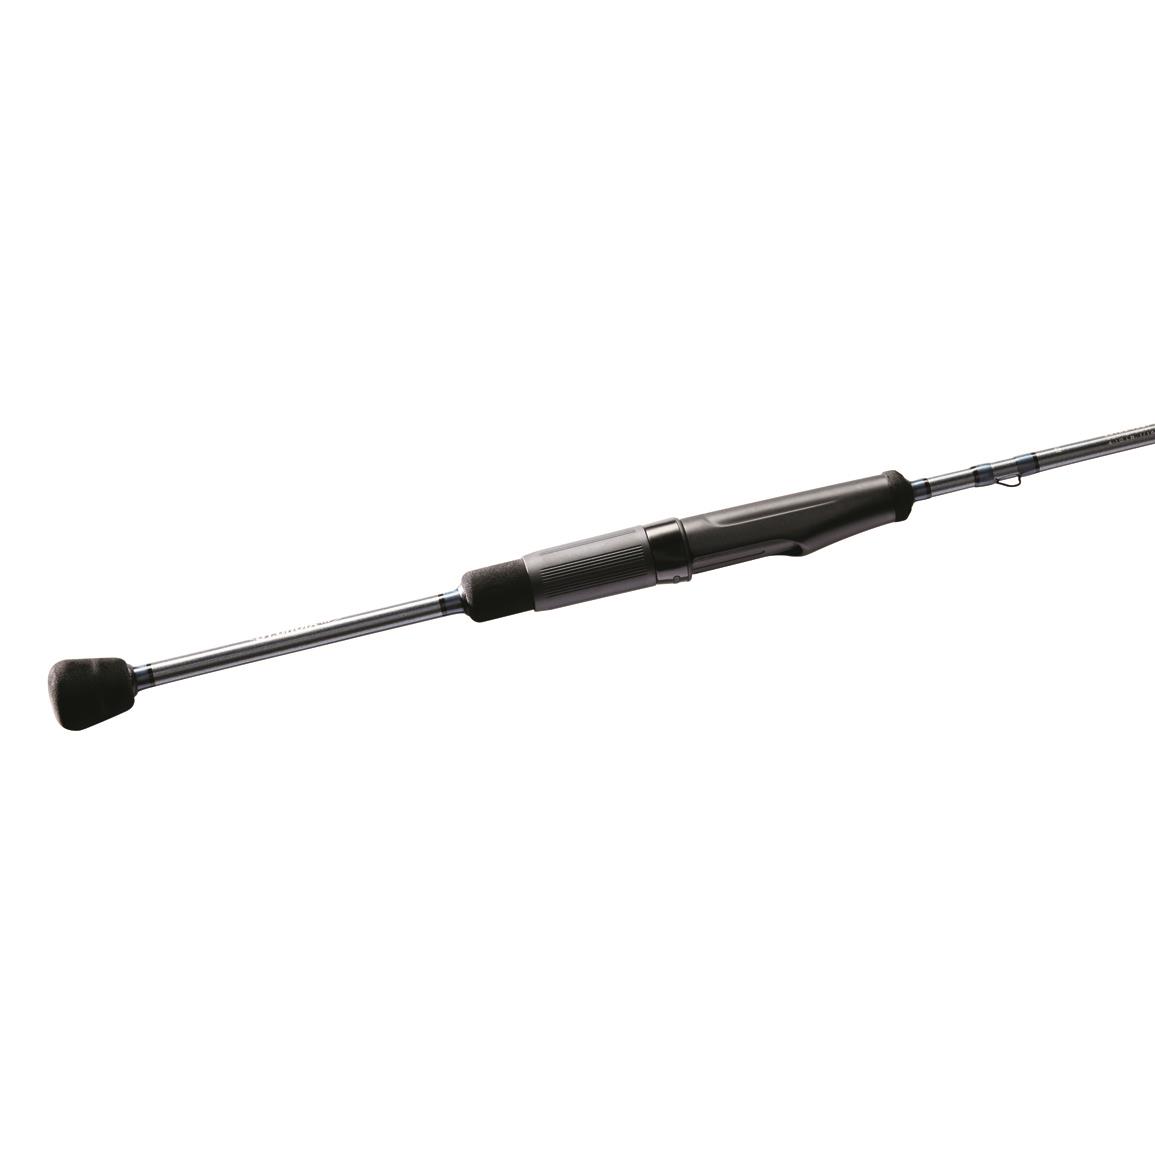 St. Croix Rods Trout Series Spinning Rod, 7' Length, Medium Power, X-Fast Action, 2 Pieces